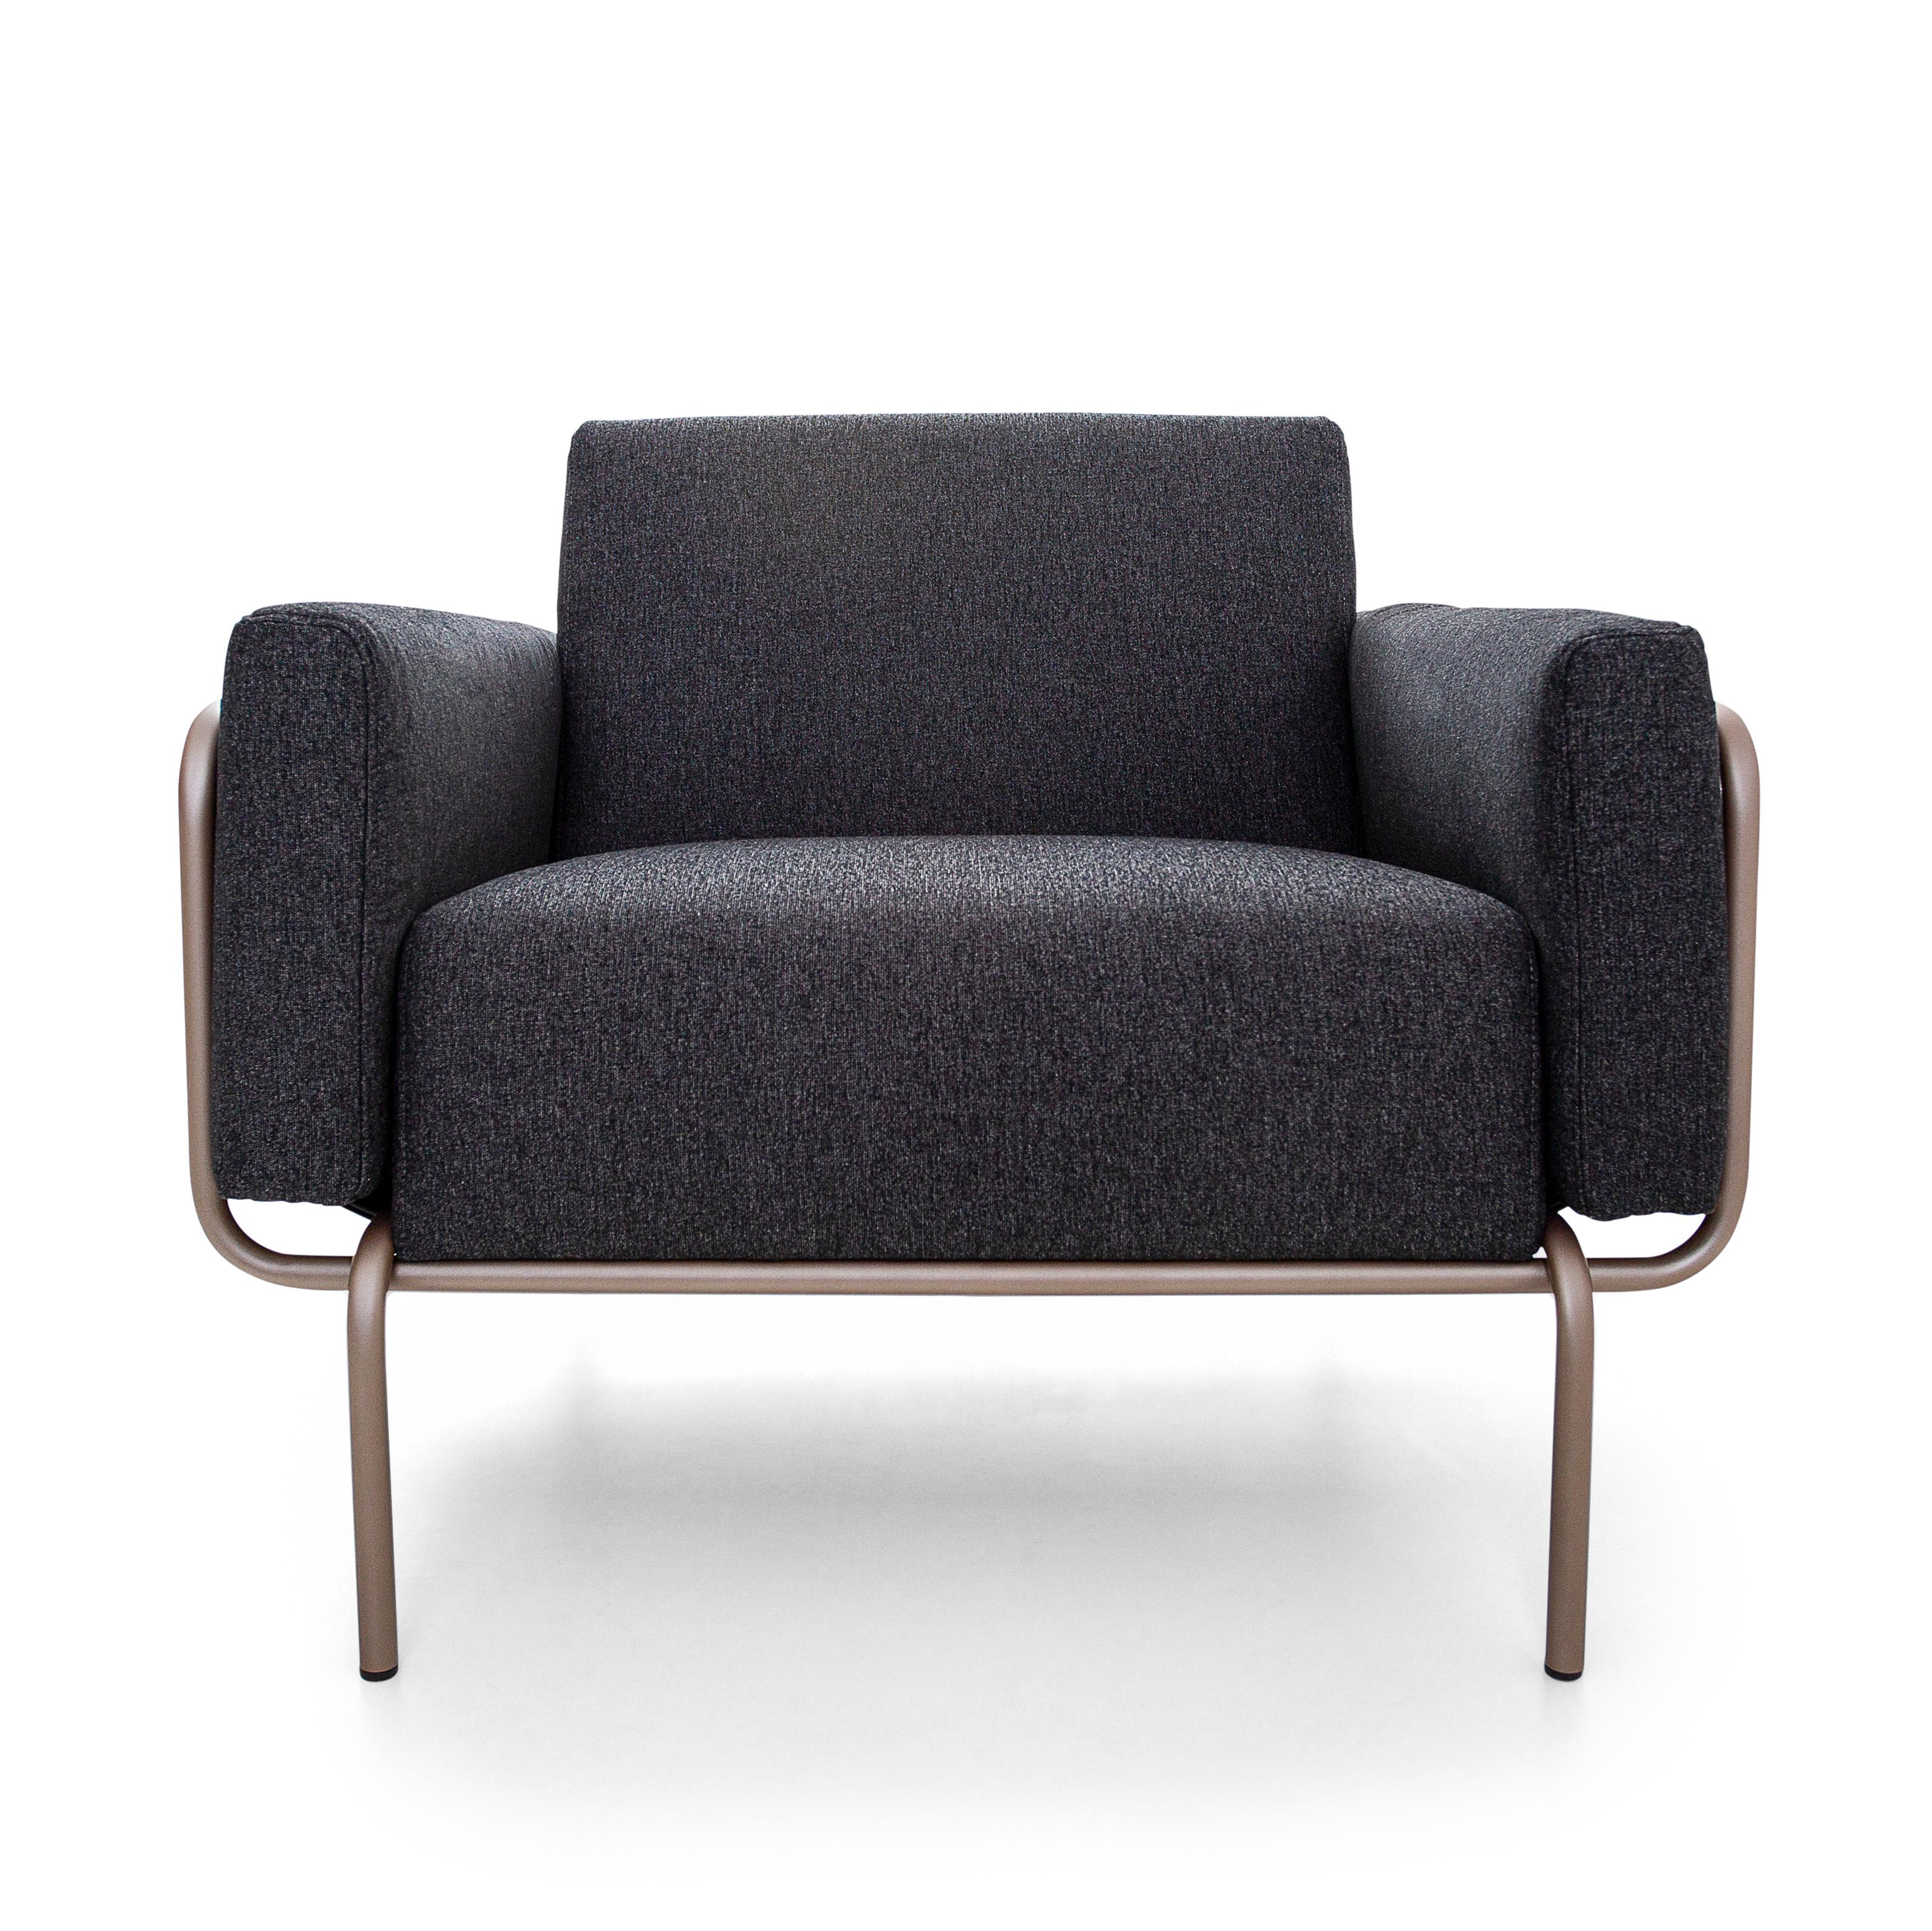 The Uultis design team has created this beautiful Trend armchair, upholstered with beautiful black fabric, feature with a pink quartz metal frame and a black leather pocket. With contemporary style features, this armchair was produced to meet all